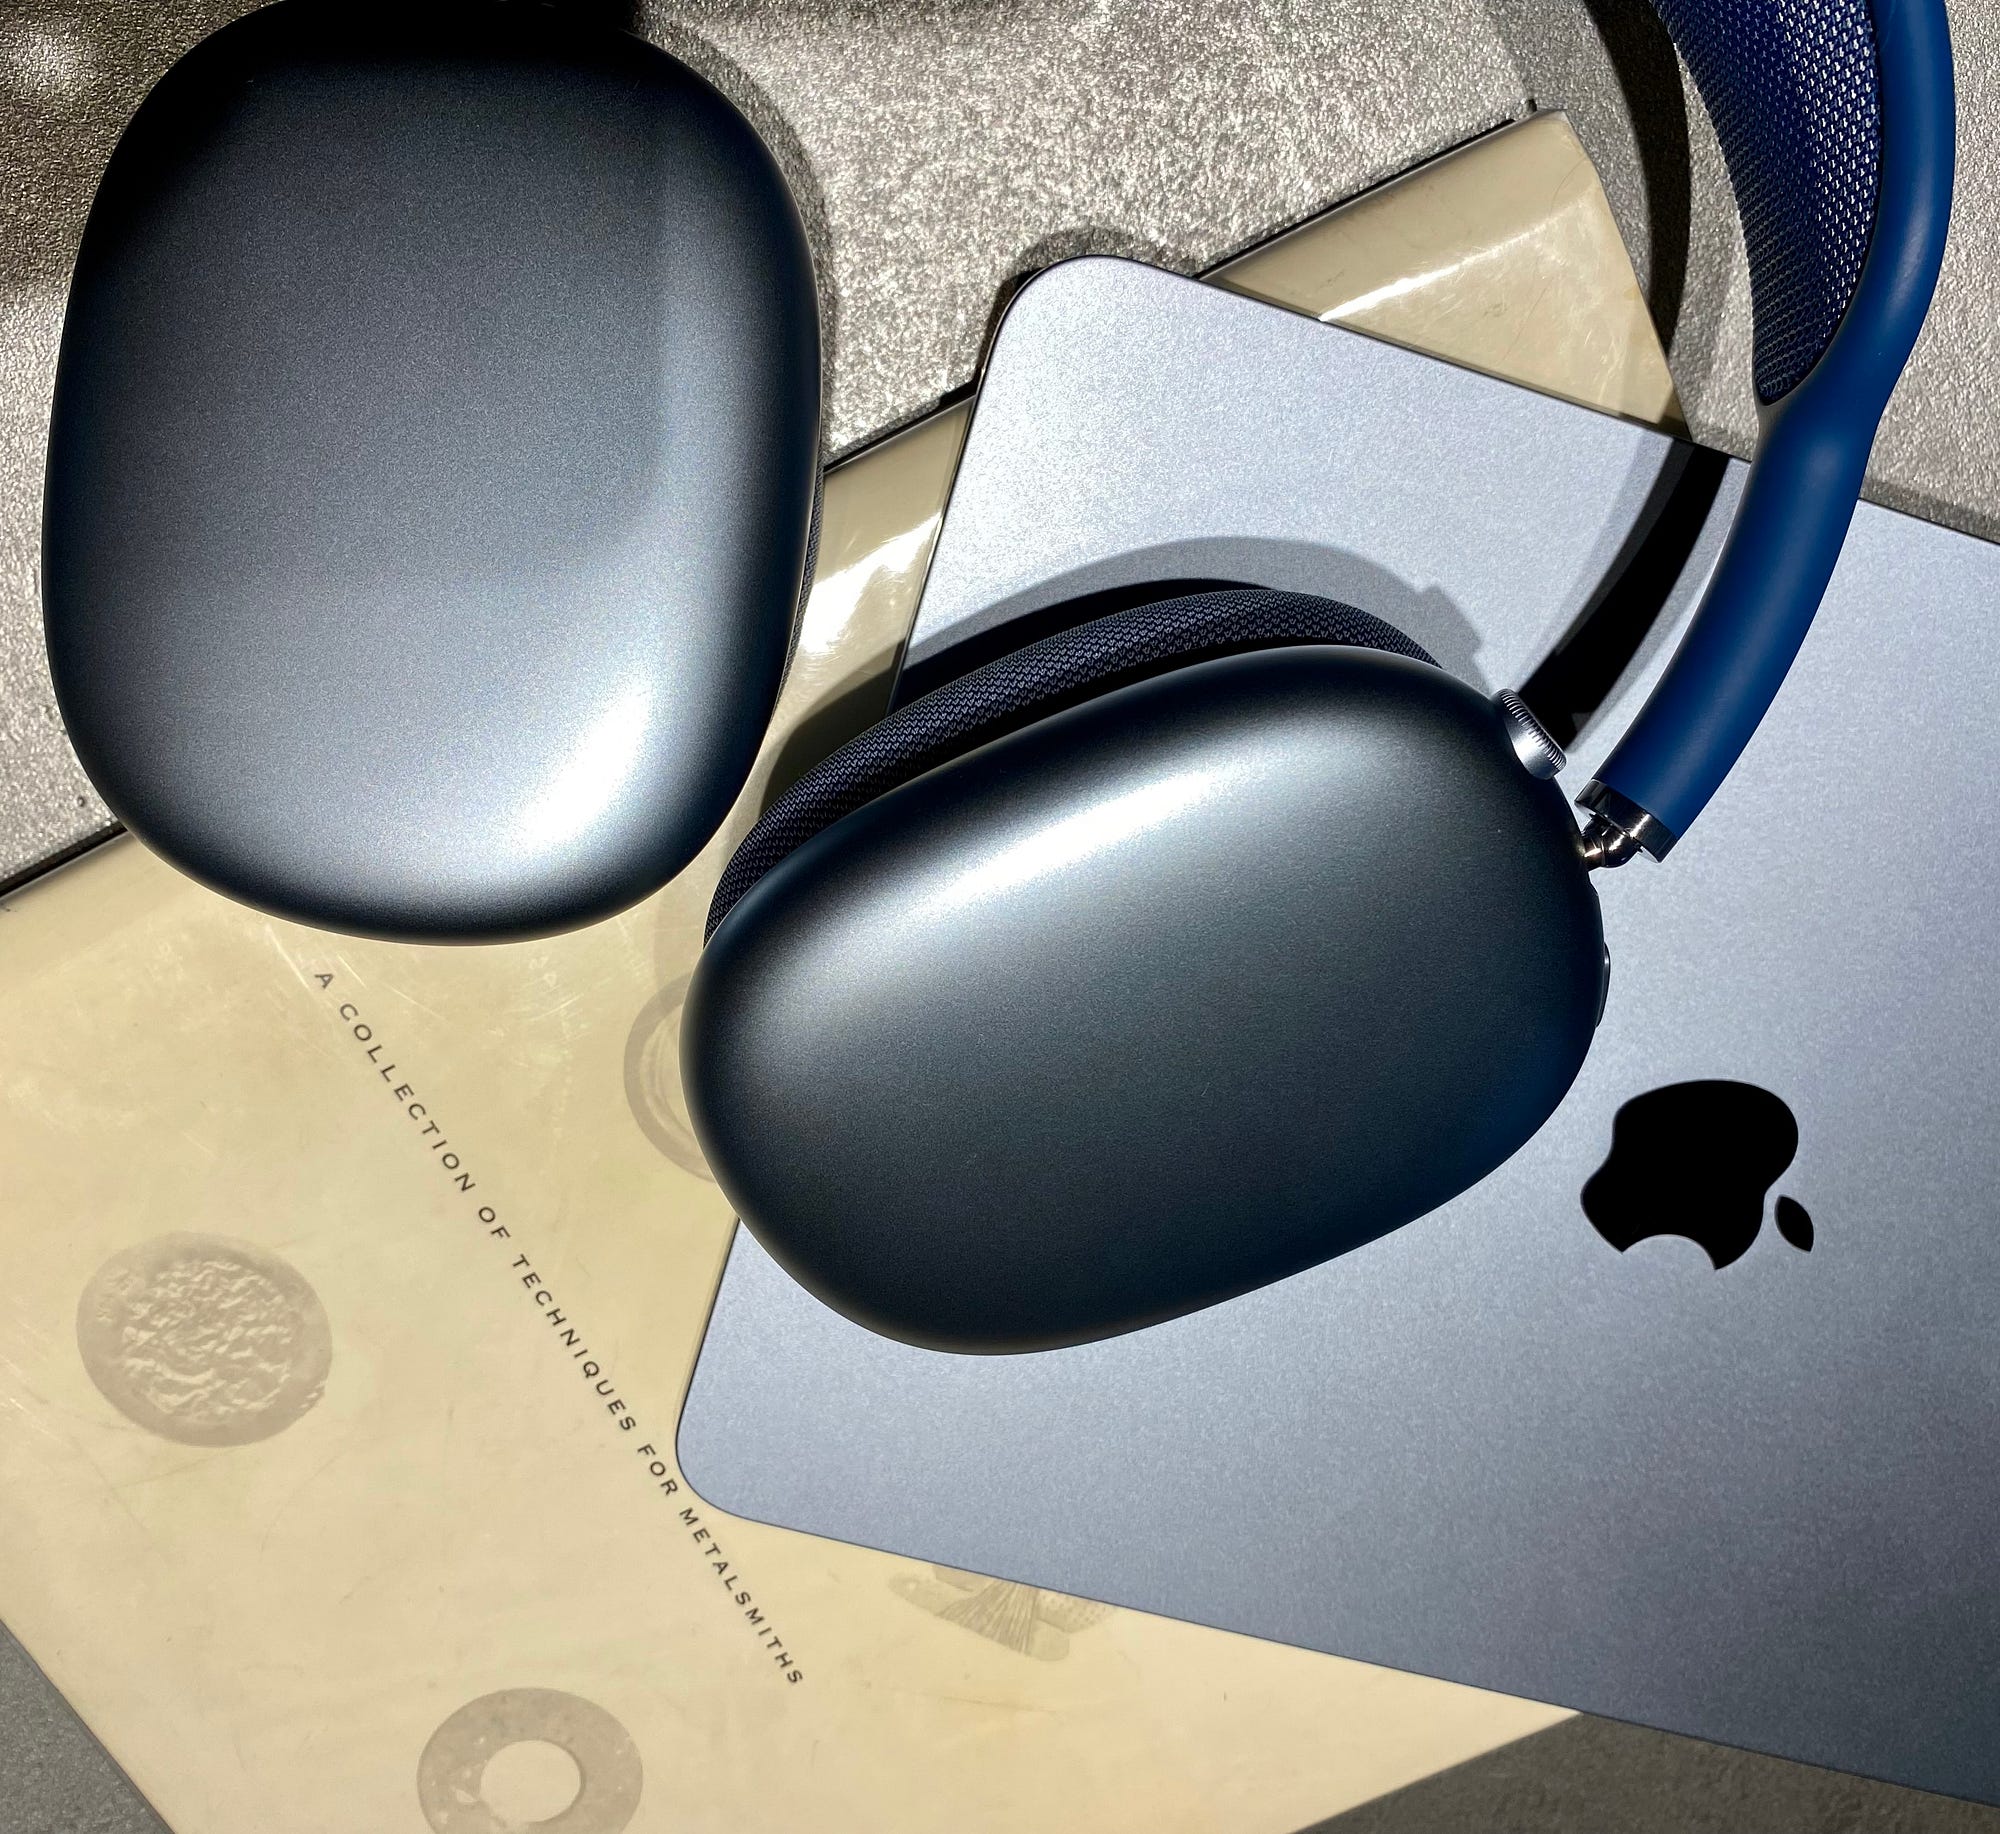 Apple AirPods Max hands-on: Here's what the $549 gets you